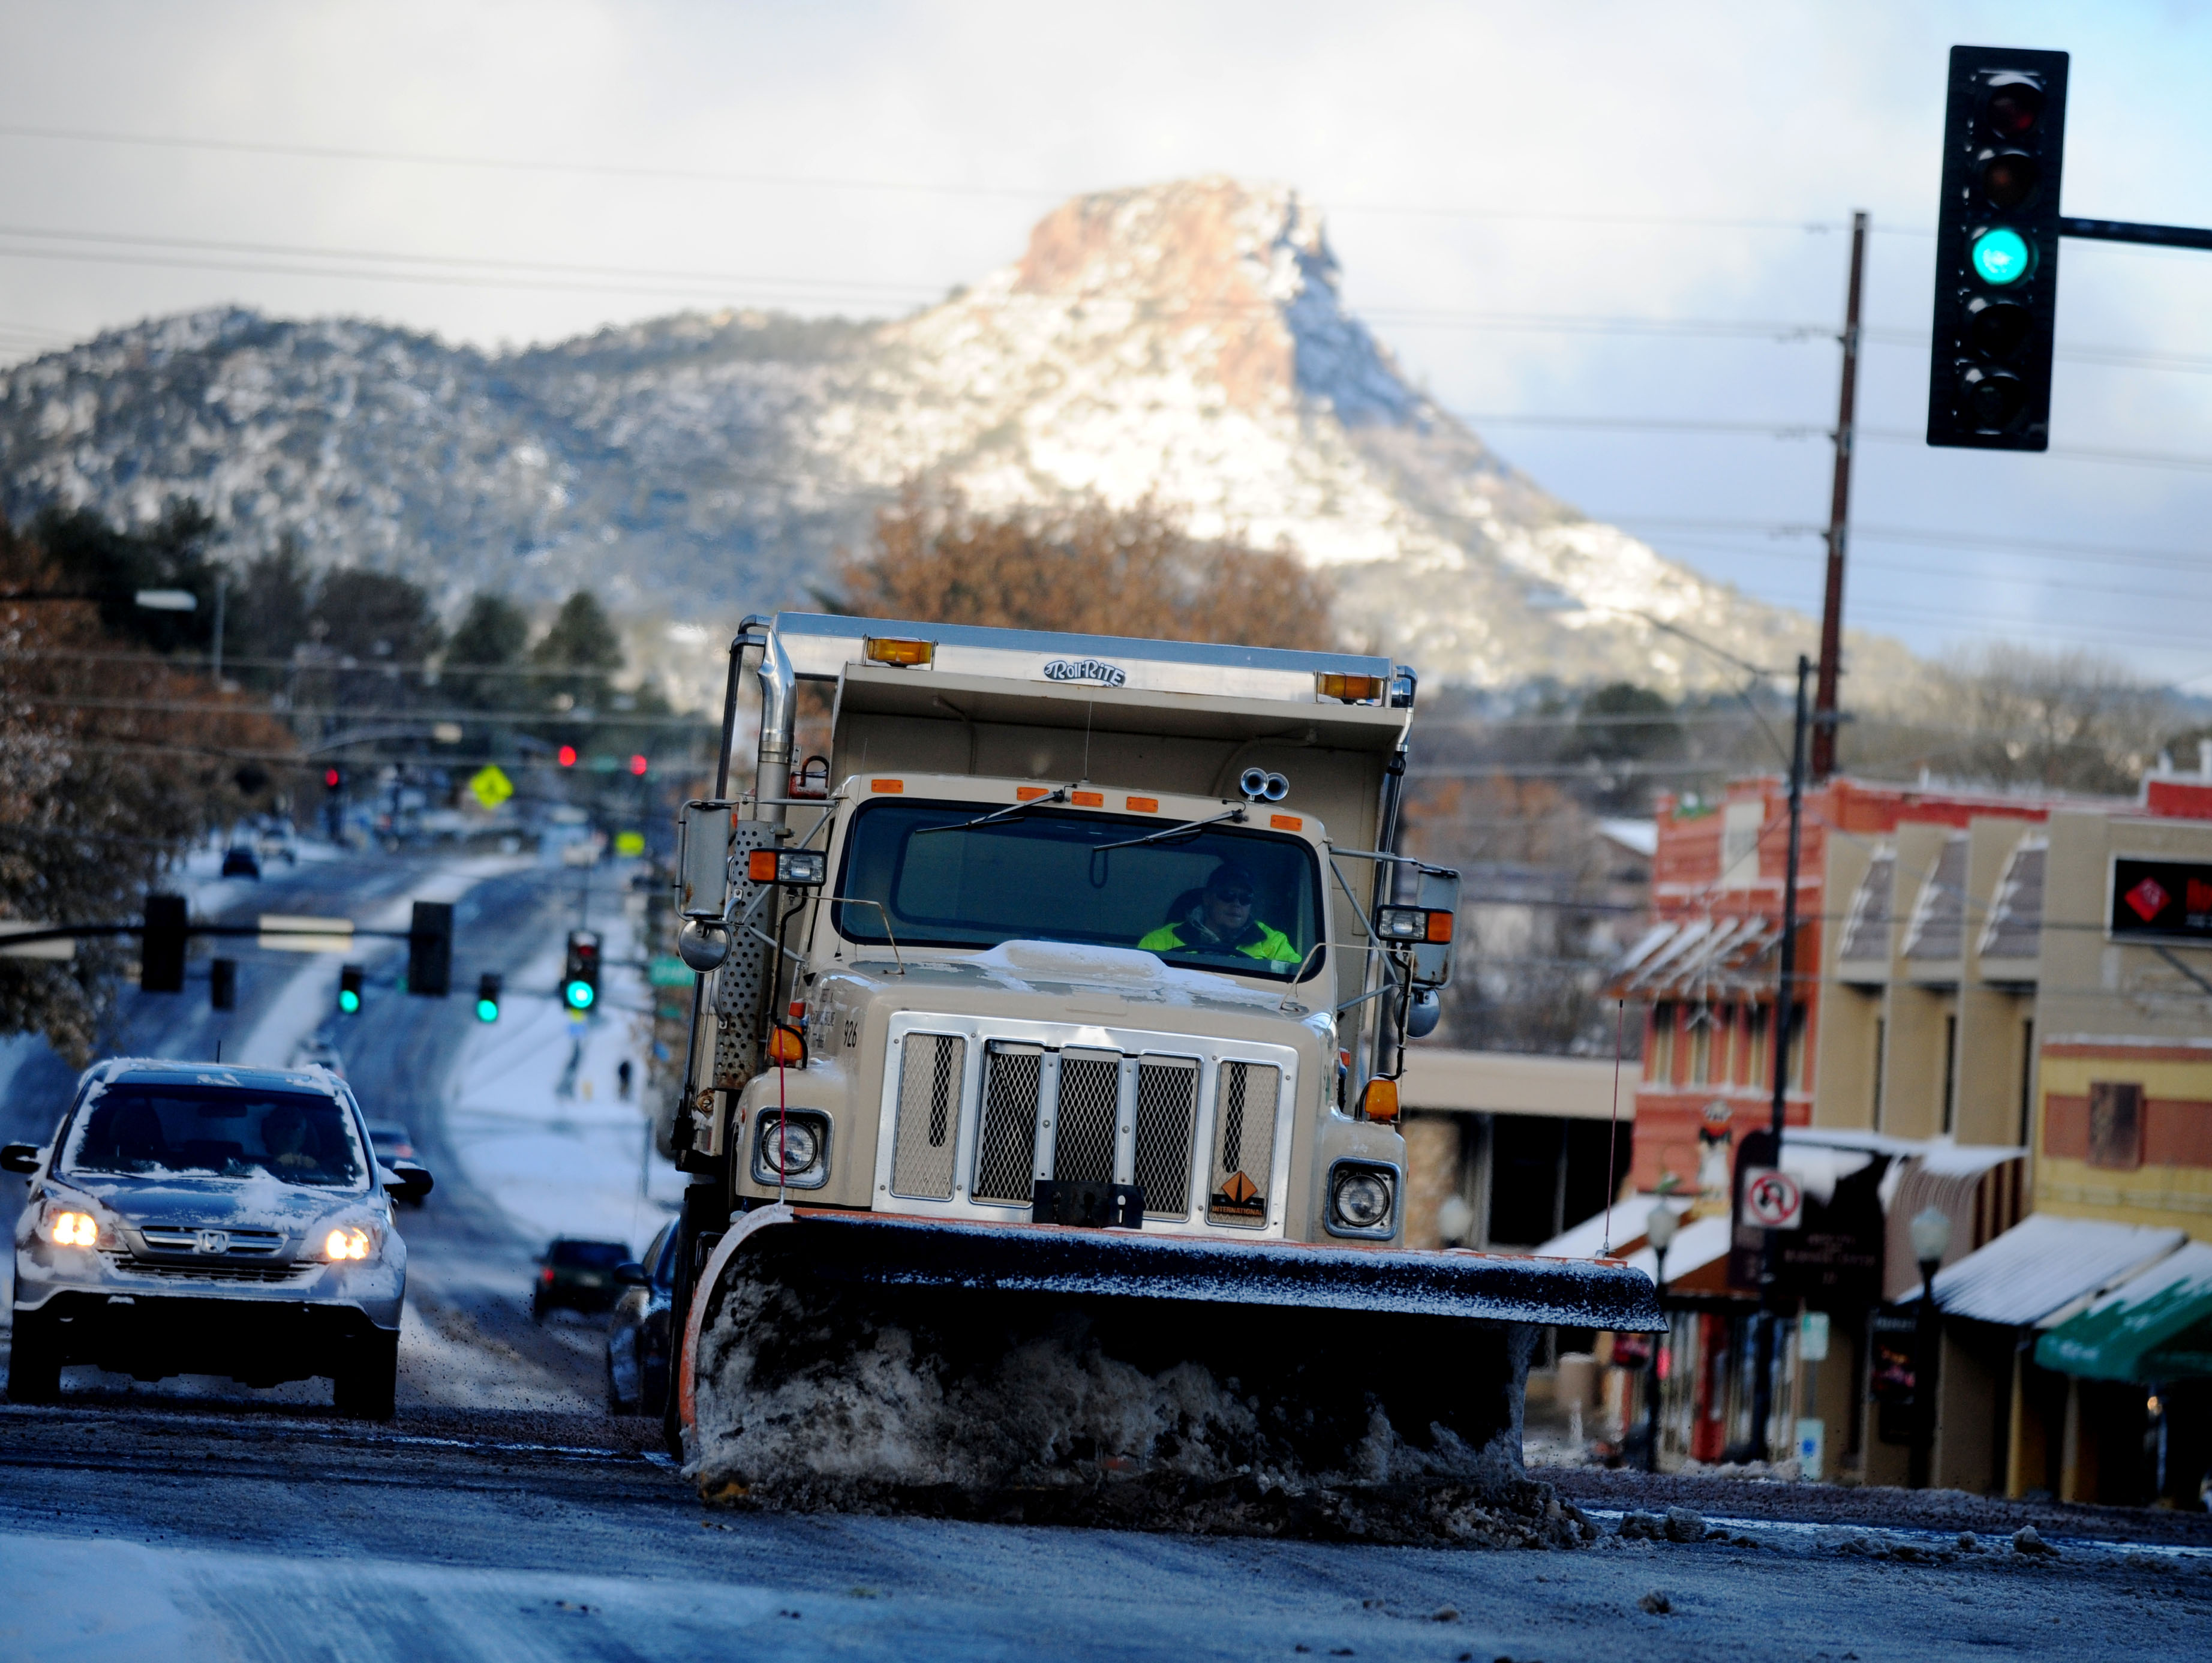 Prescott gears up for ‘largest winter storm of the season’ The Daily